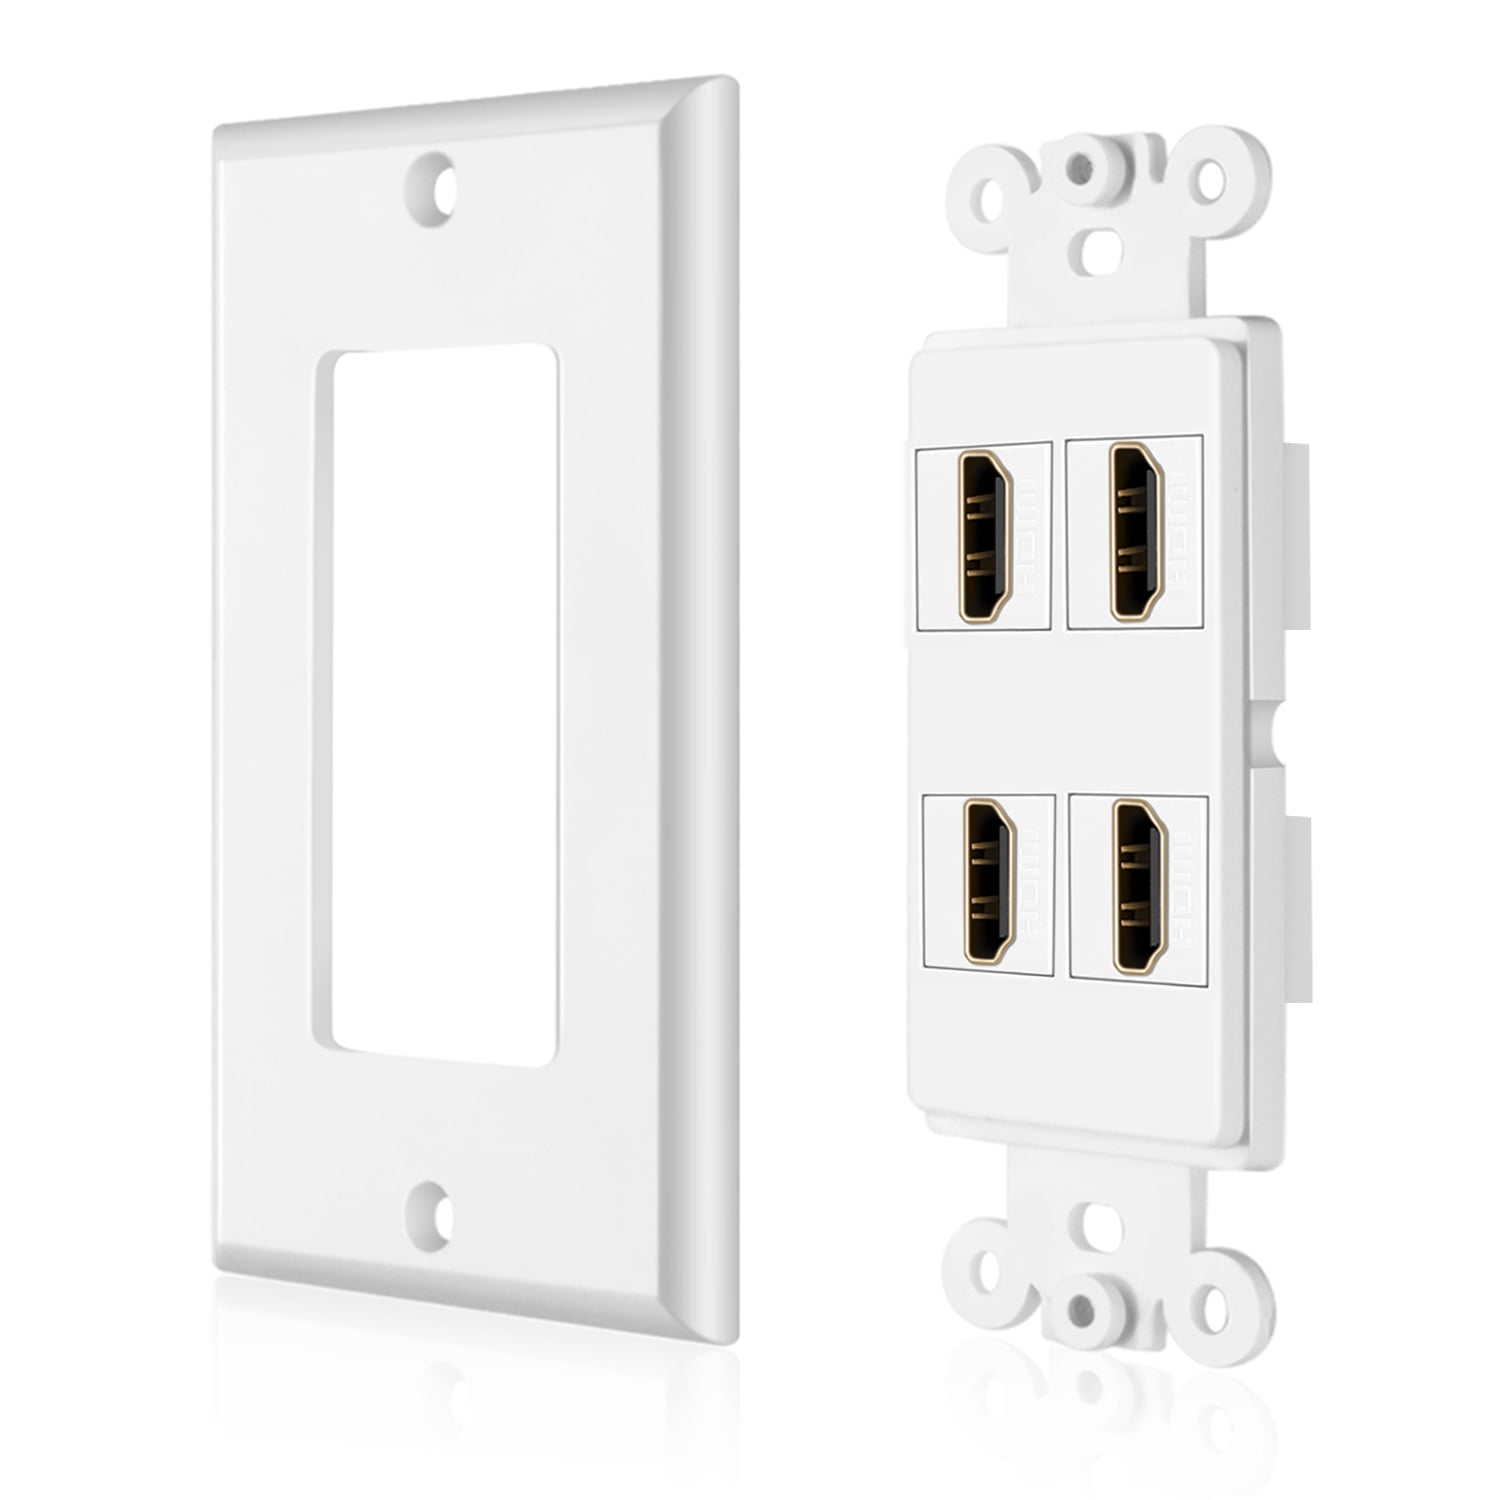 CMPLE HDMI Wall Plate Dual-Port White Wall Plate 4” Rear Extension Cable,  2-Port HDMI Insert (4K UHD, ARC, and Ethernet Pass-Thru Support)